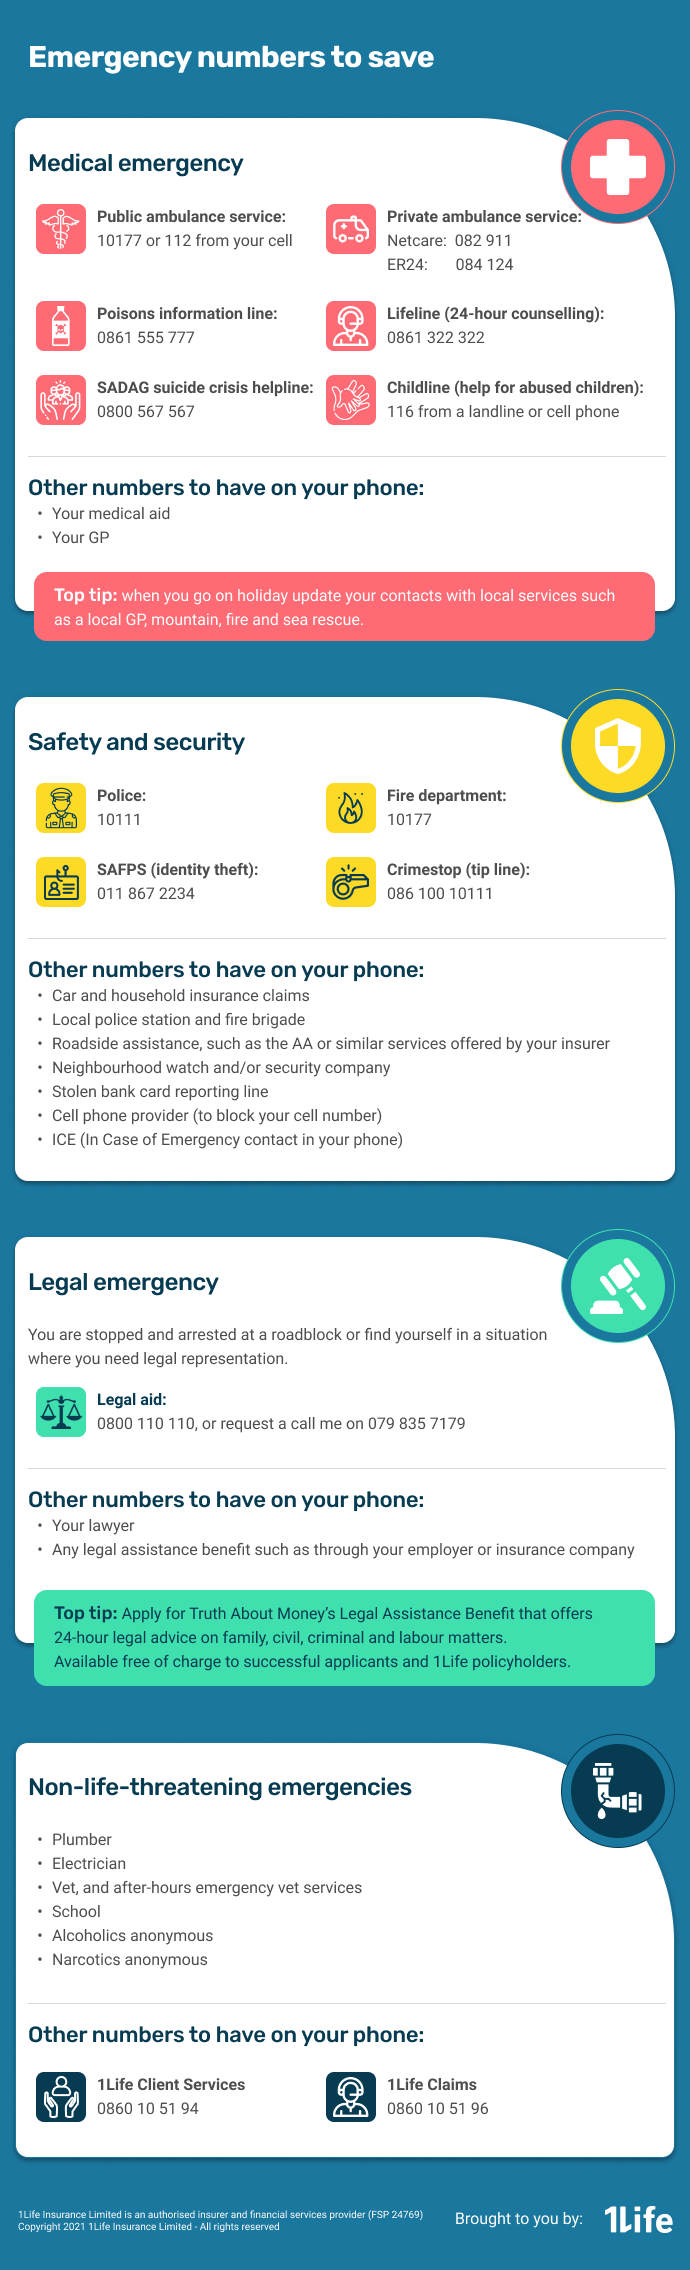 1Life-EmergencyContacts-Infographic.png